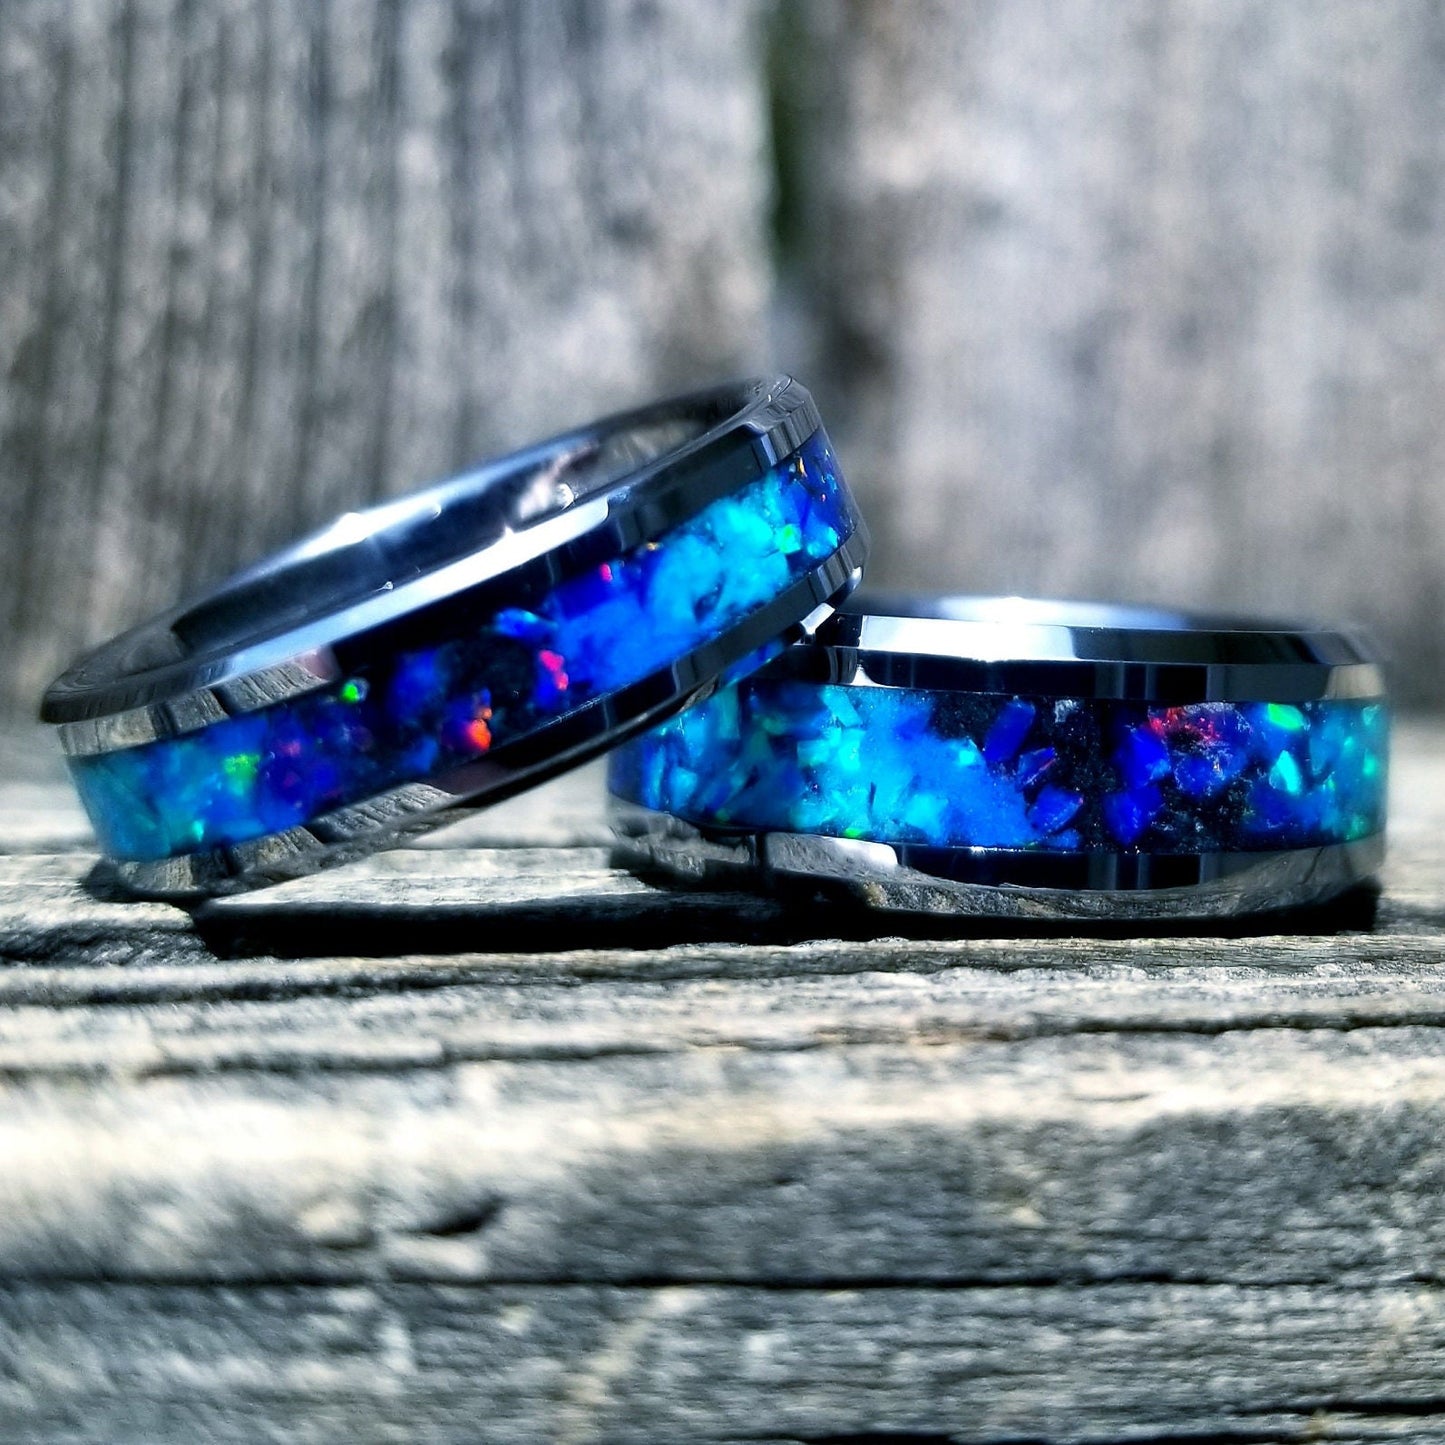 Tungsten carbide glow ring with turquoise opal and blue fire opal inlay. Men's ring. Women's ring. Wedding ring. Glow ring Sizes 5-13